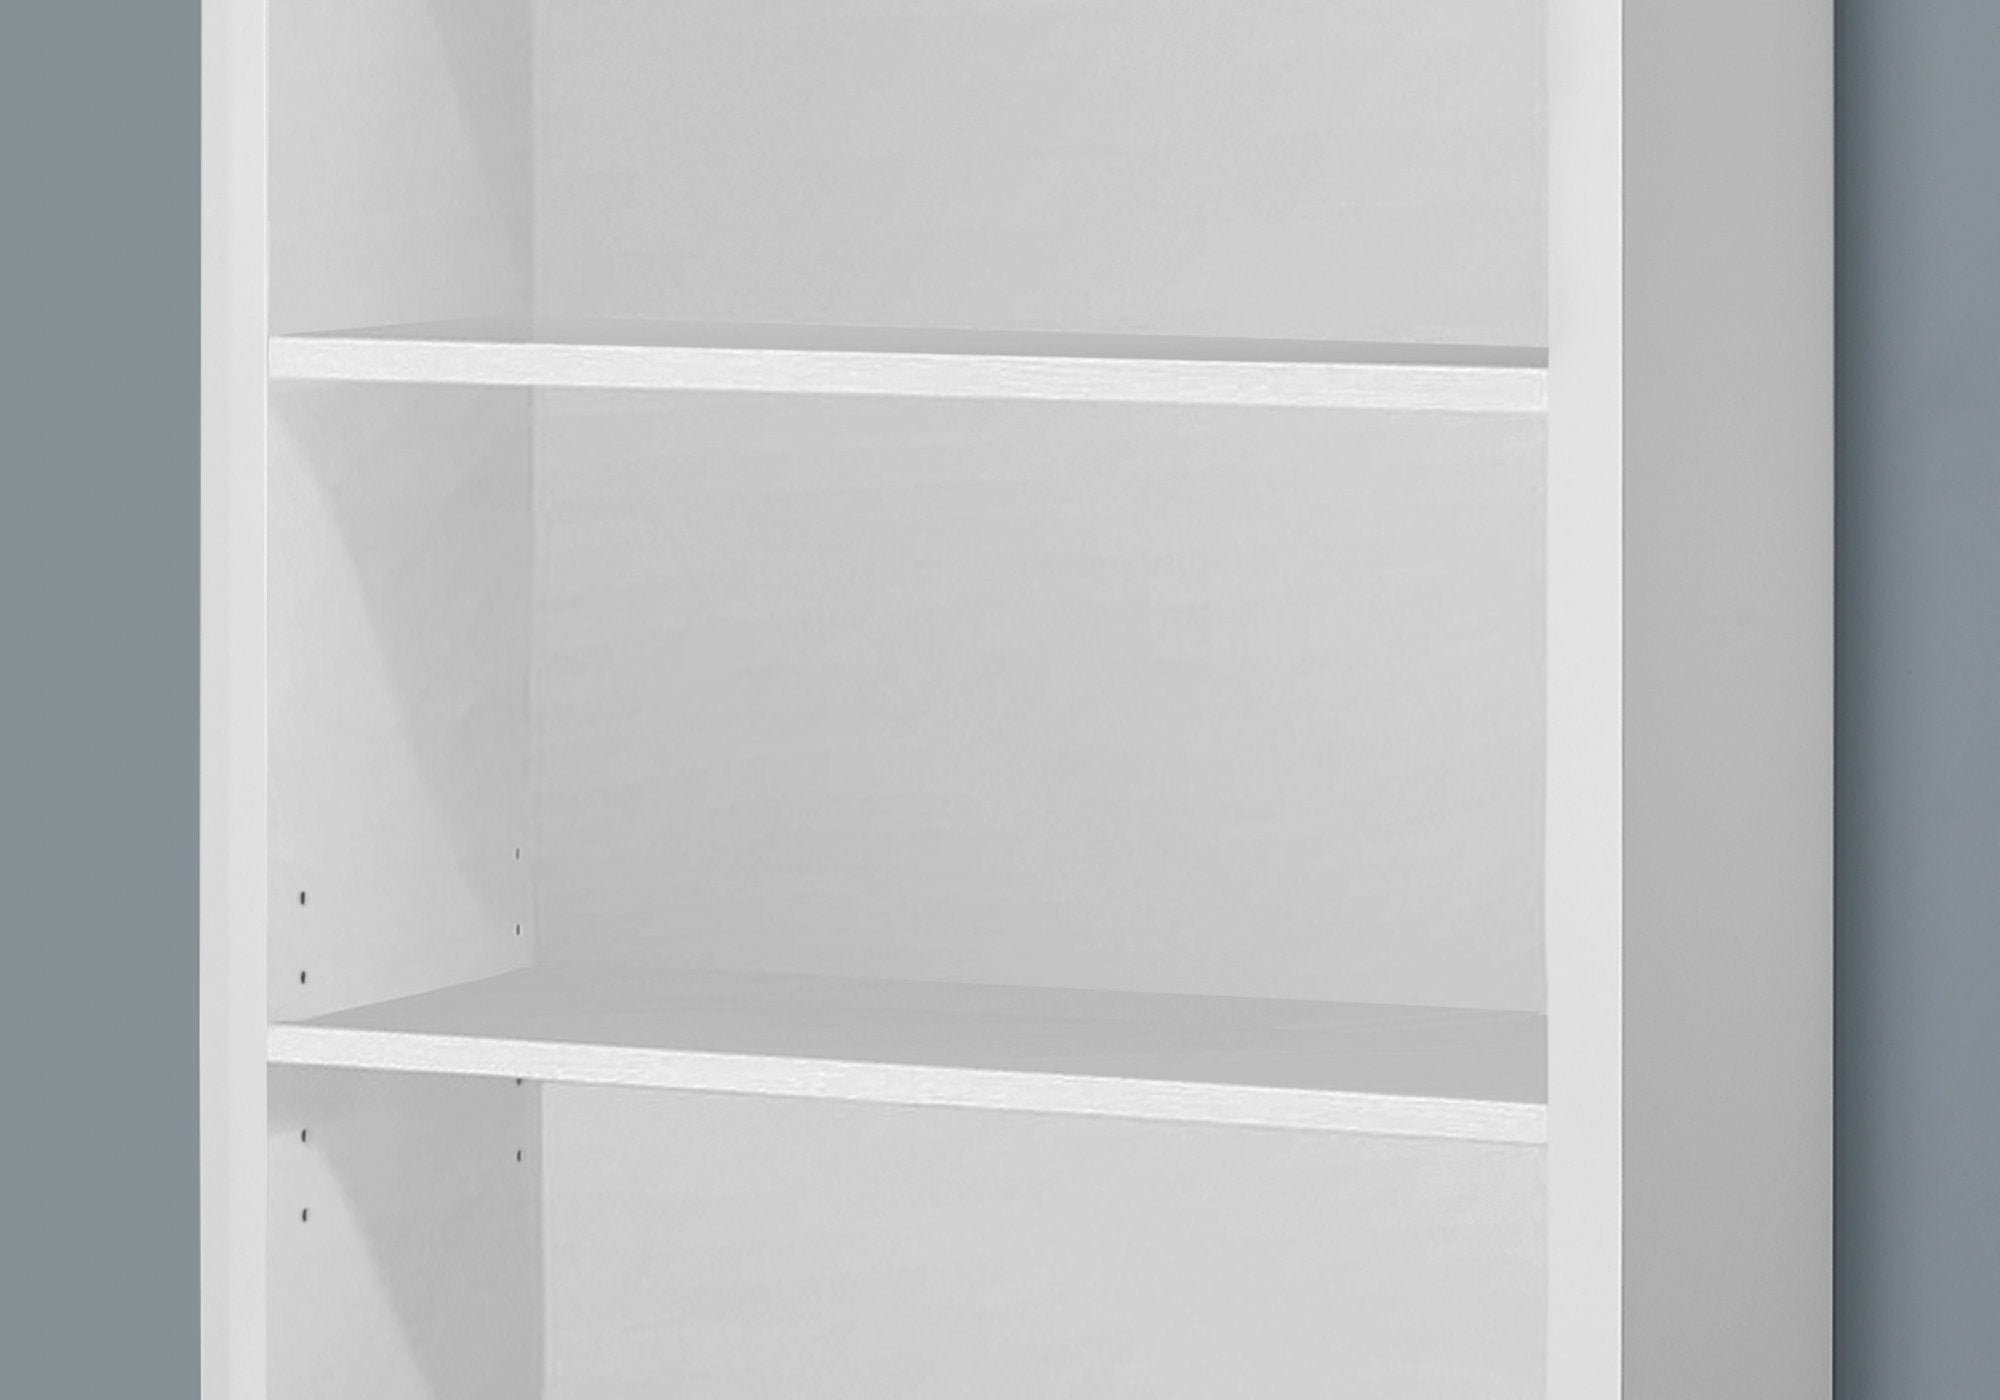 Bookcase - 48H / White With Adjustable Shelves